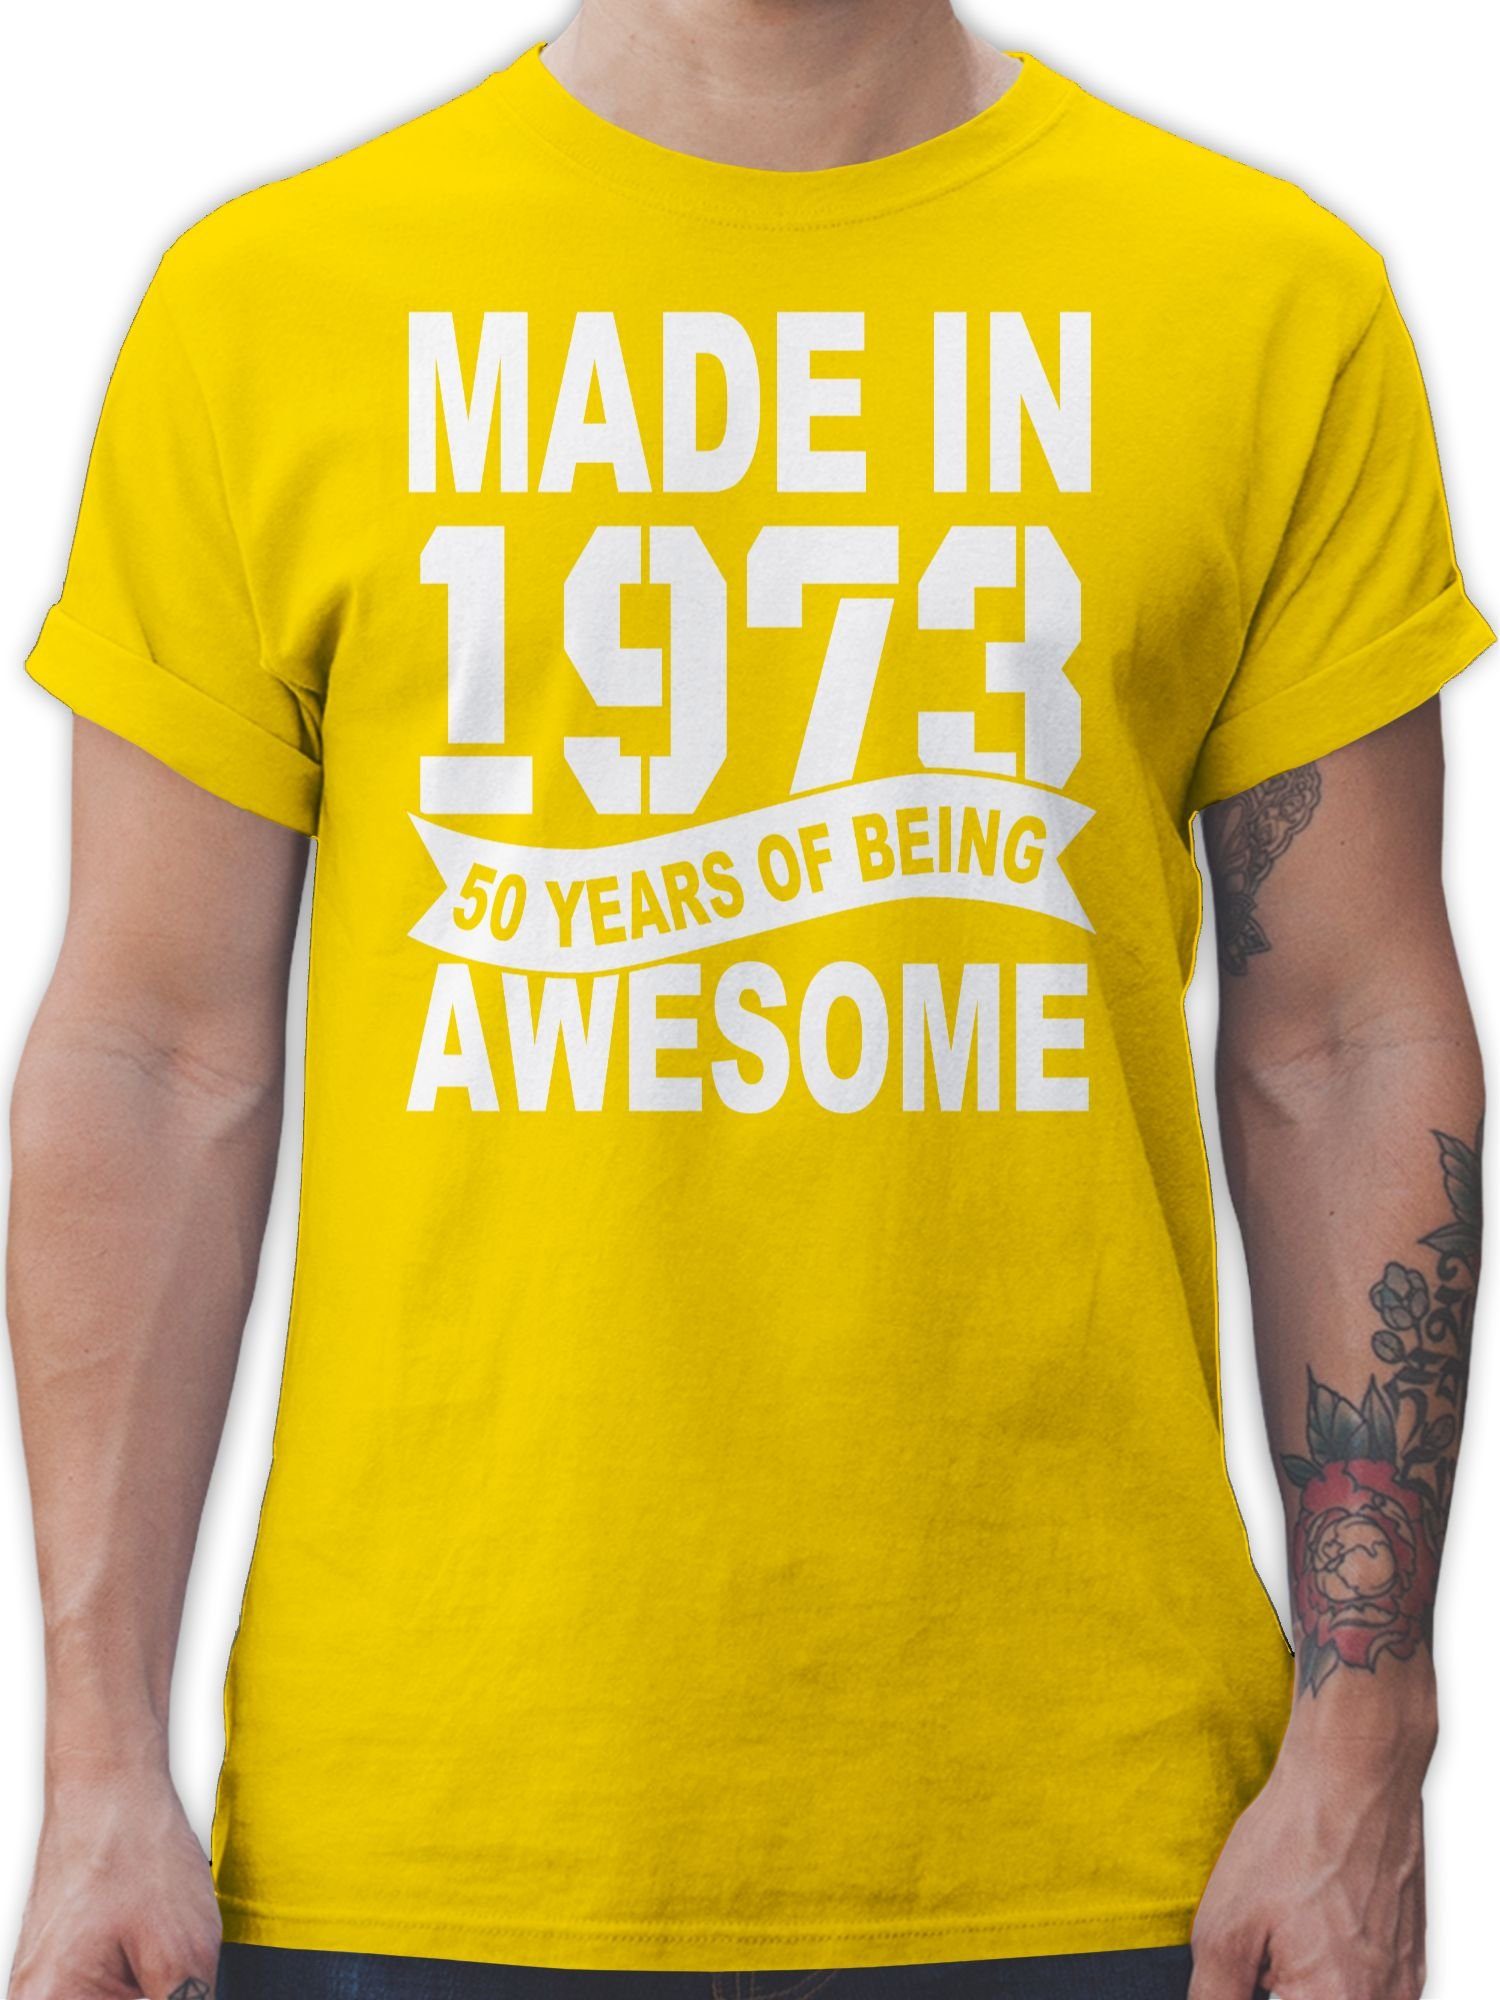 Shirtracer T-Shirt Made in 1973 Fifty years of being awesome weiß - 50.  Geburtstag - Herren Premium T-Shirt tshirt 50. geburtstag mann - fuffzich t  shirt herren